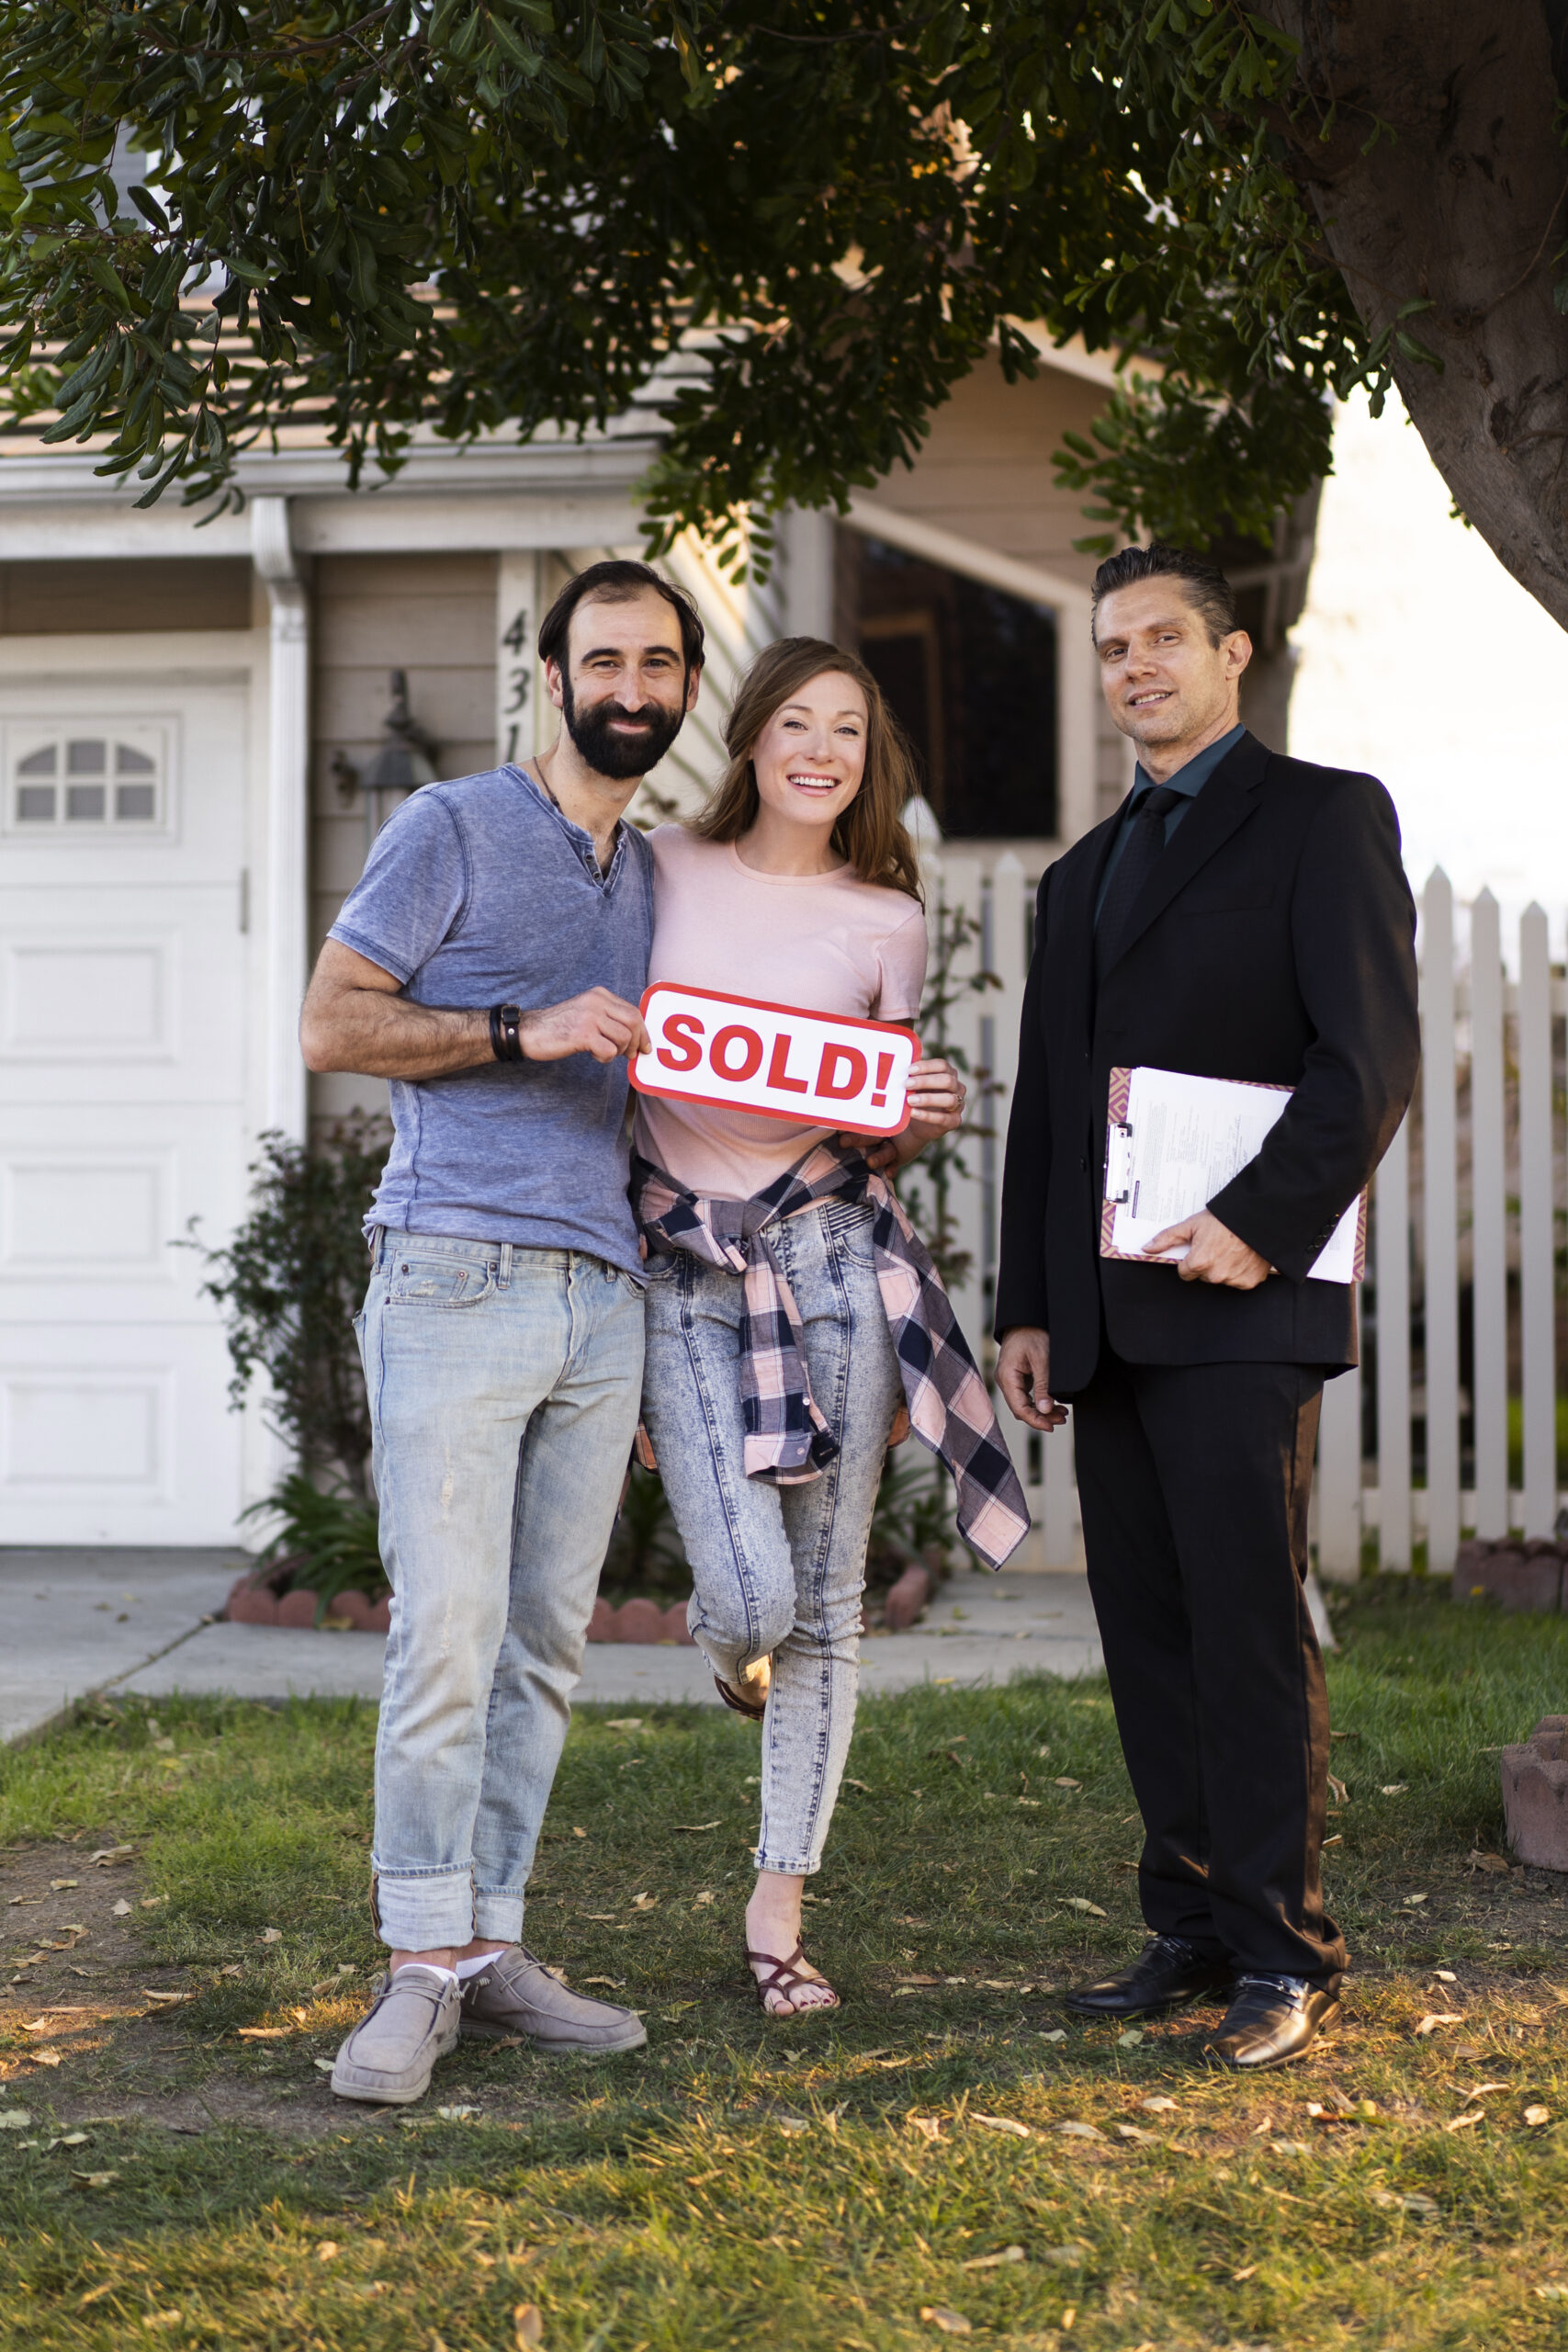 Is It A Buyer's or Seller's Real Estate Market?